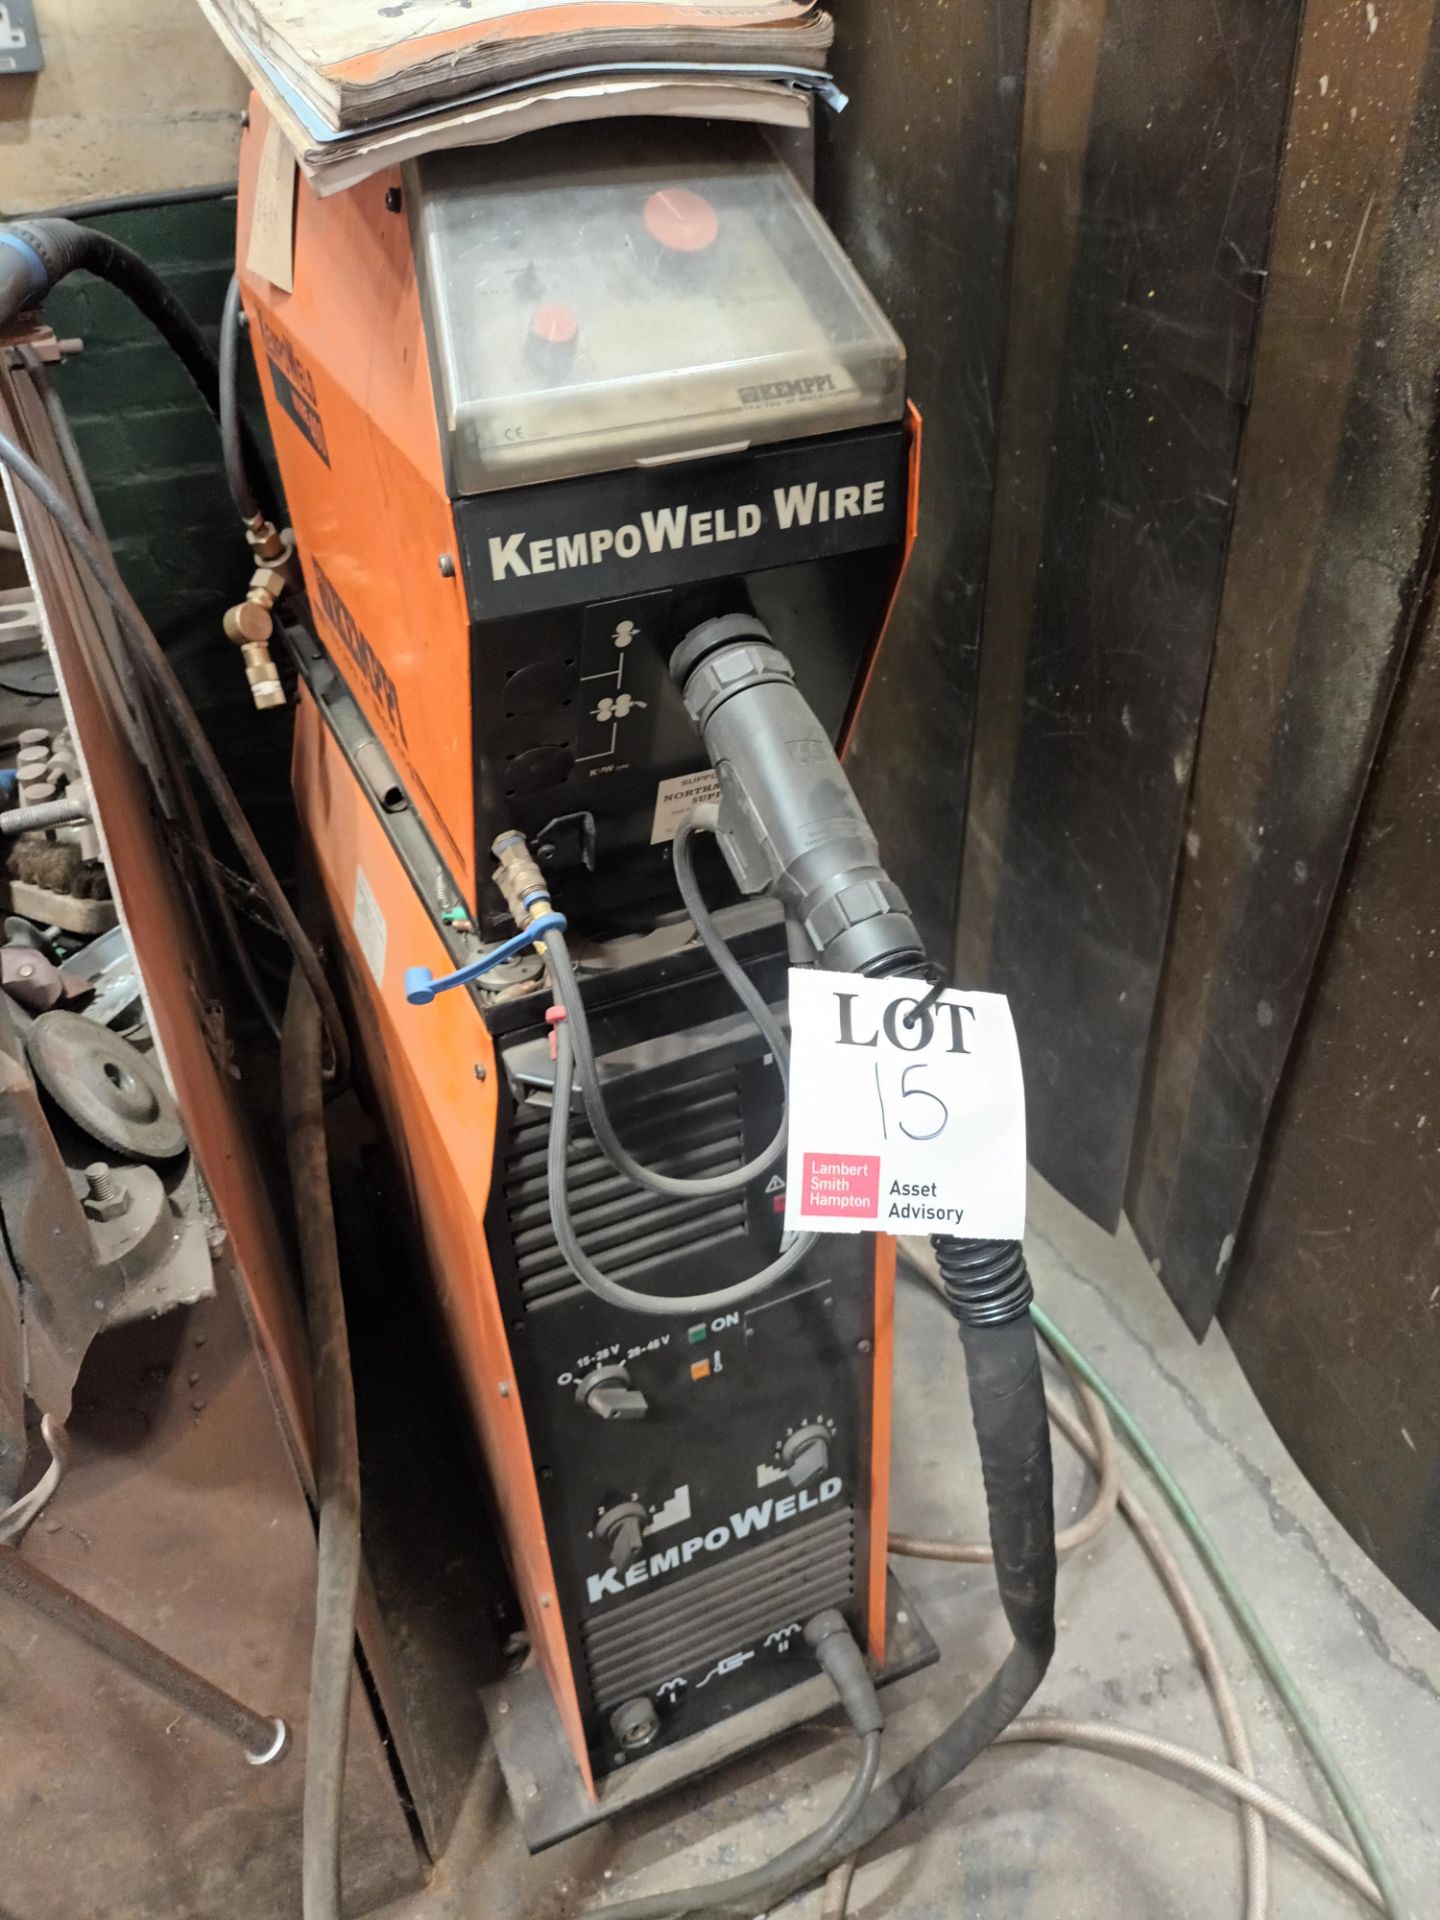 Kemppi Kempoweld 4200W mig welder, Serial no. 1990151D with Kemppi Kempoweld Wire 400 wire feed, Se